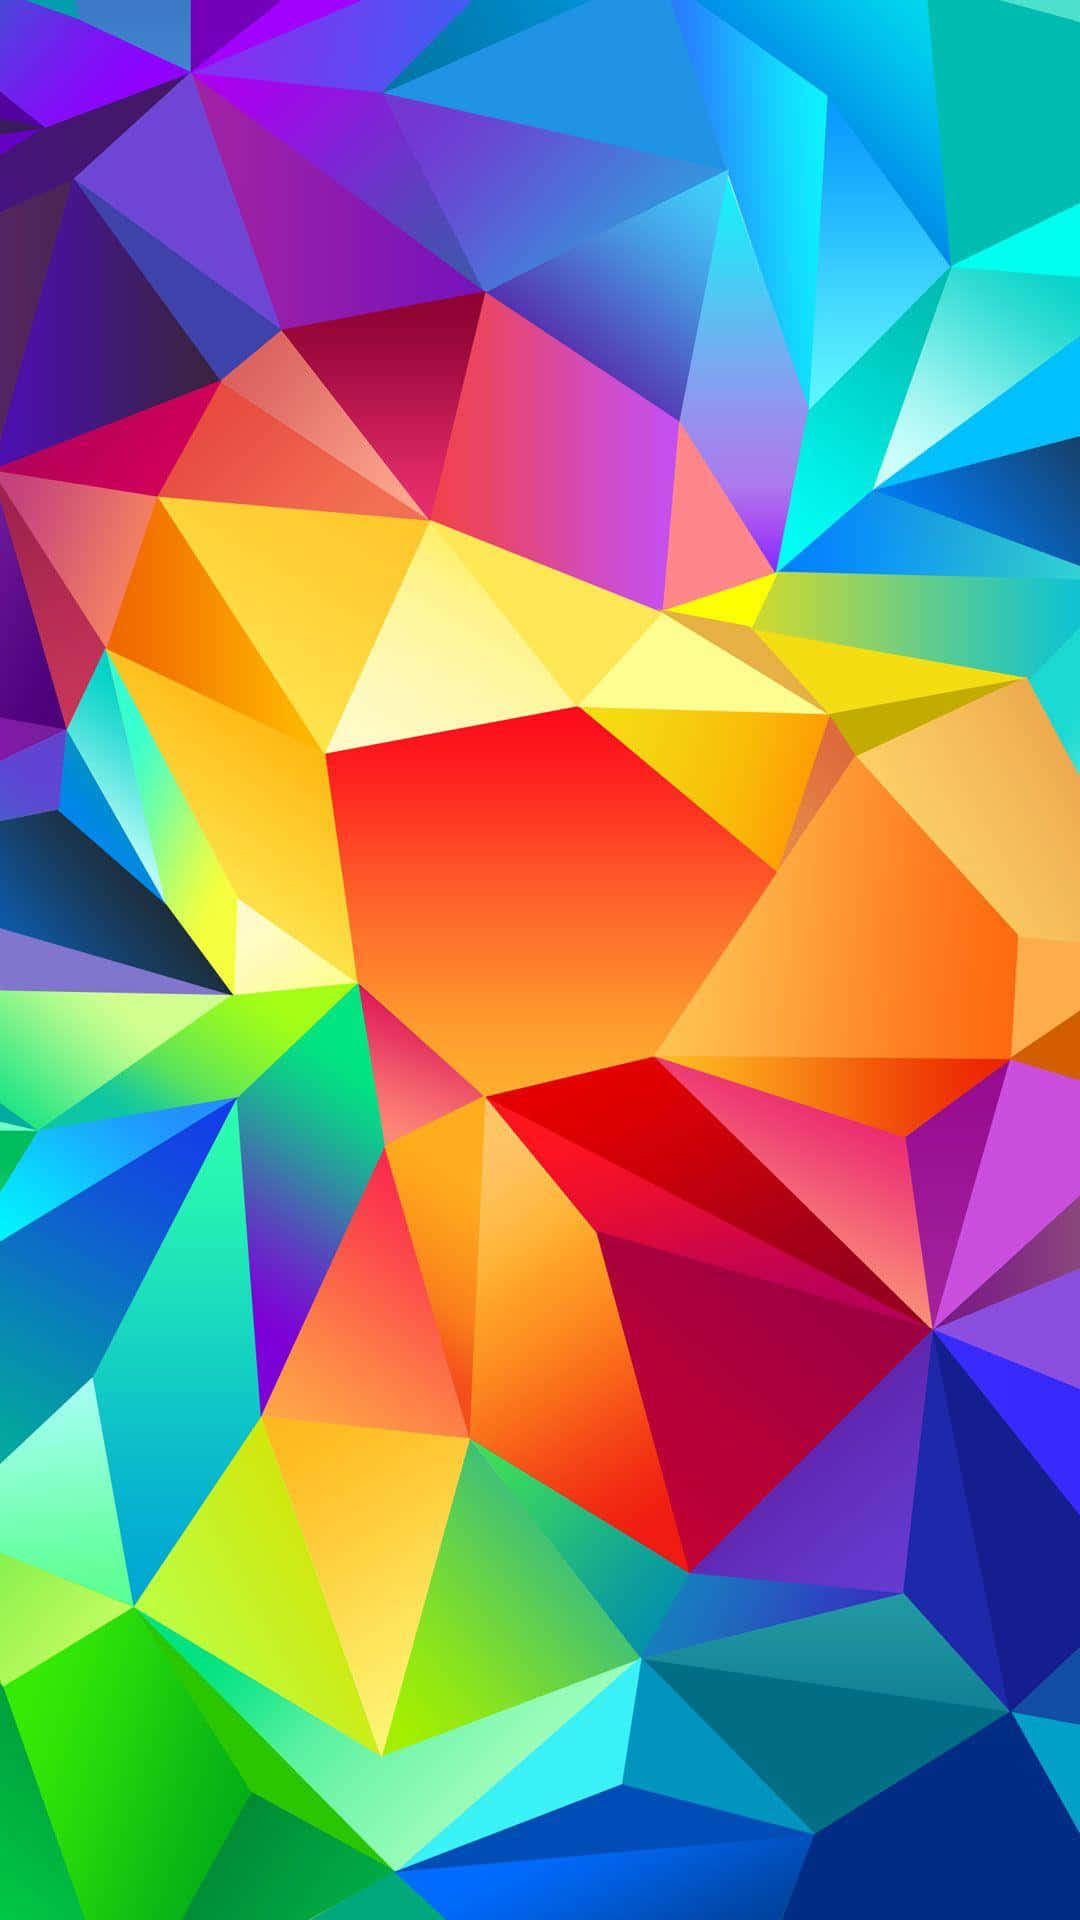 Spice Up Your Life With A Colorful Iphone Background